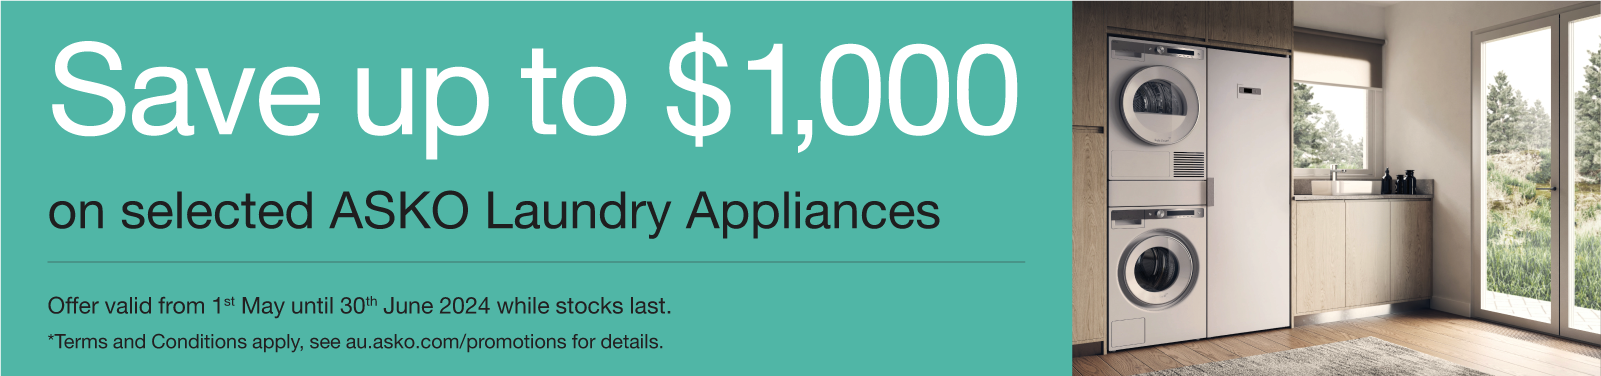 Save Up To $1,000 On Selected ASKO Laundry Appliances at Retravision